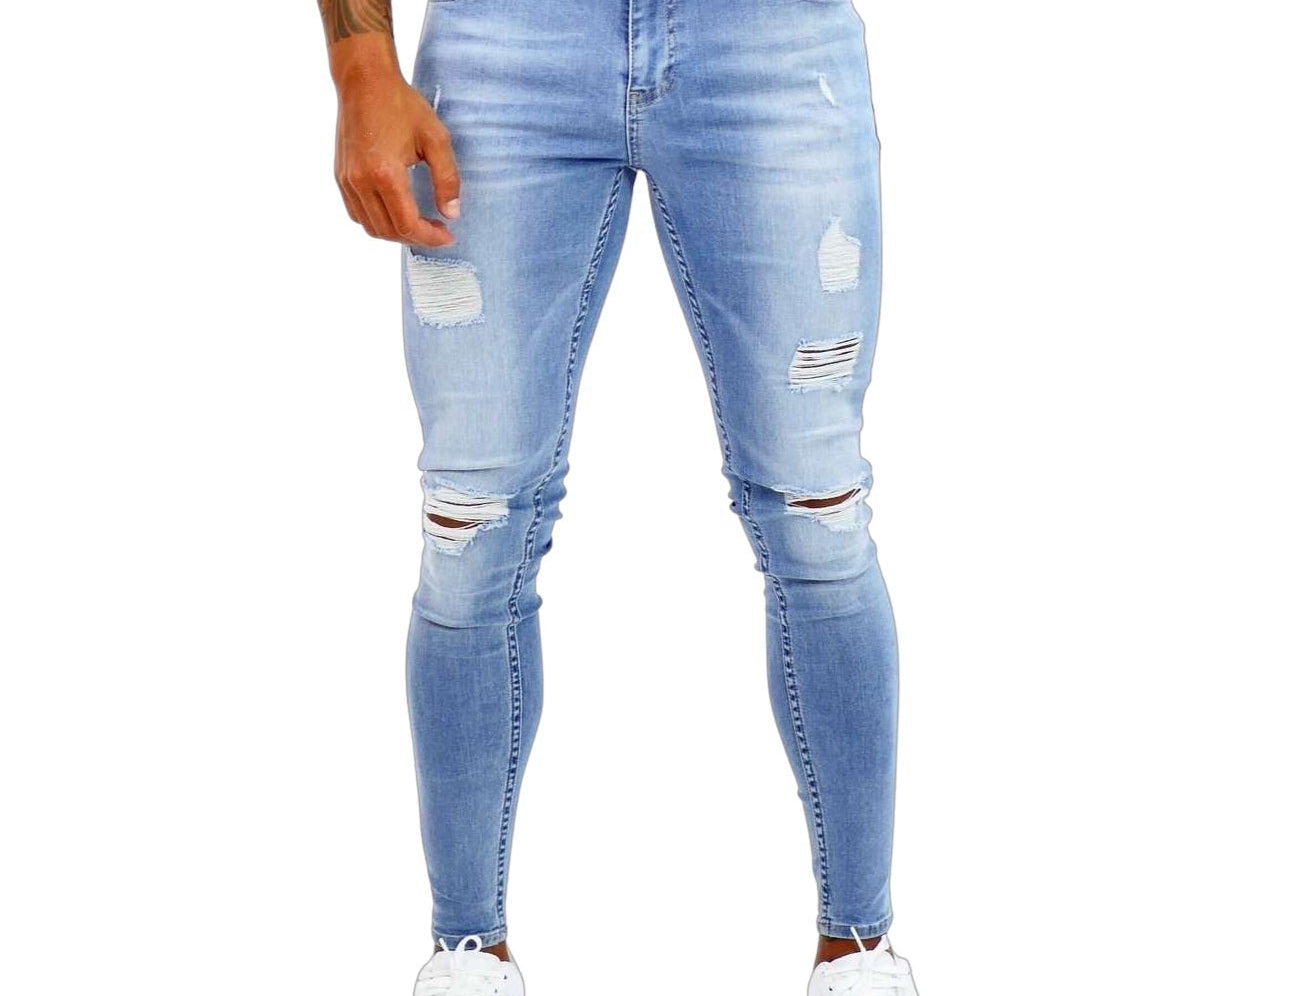 Exible - Light Blue Skinny Jeans for Men - Sarman Fashion - Wholesale Clothing Fashion Brand for Men from Canada